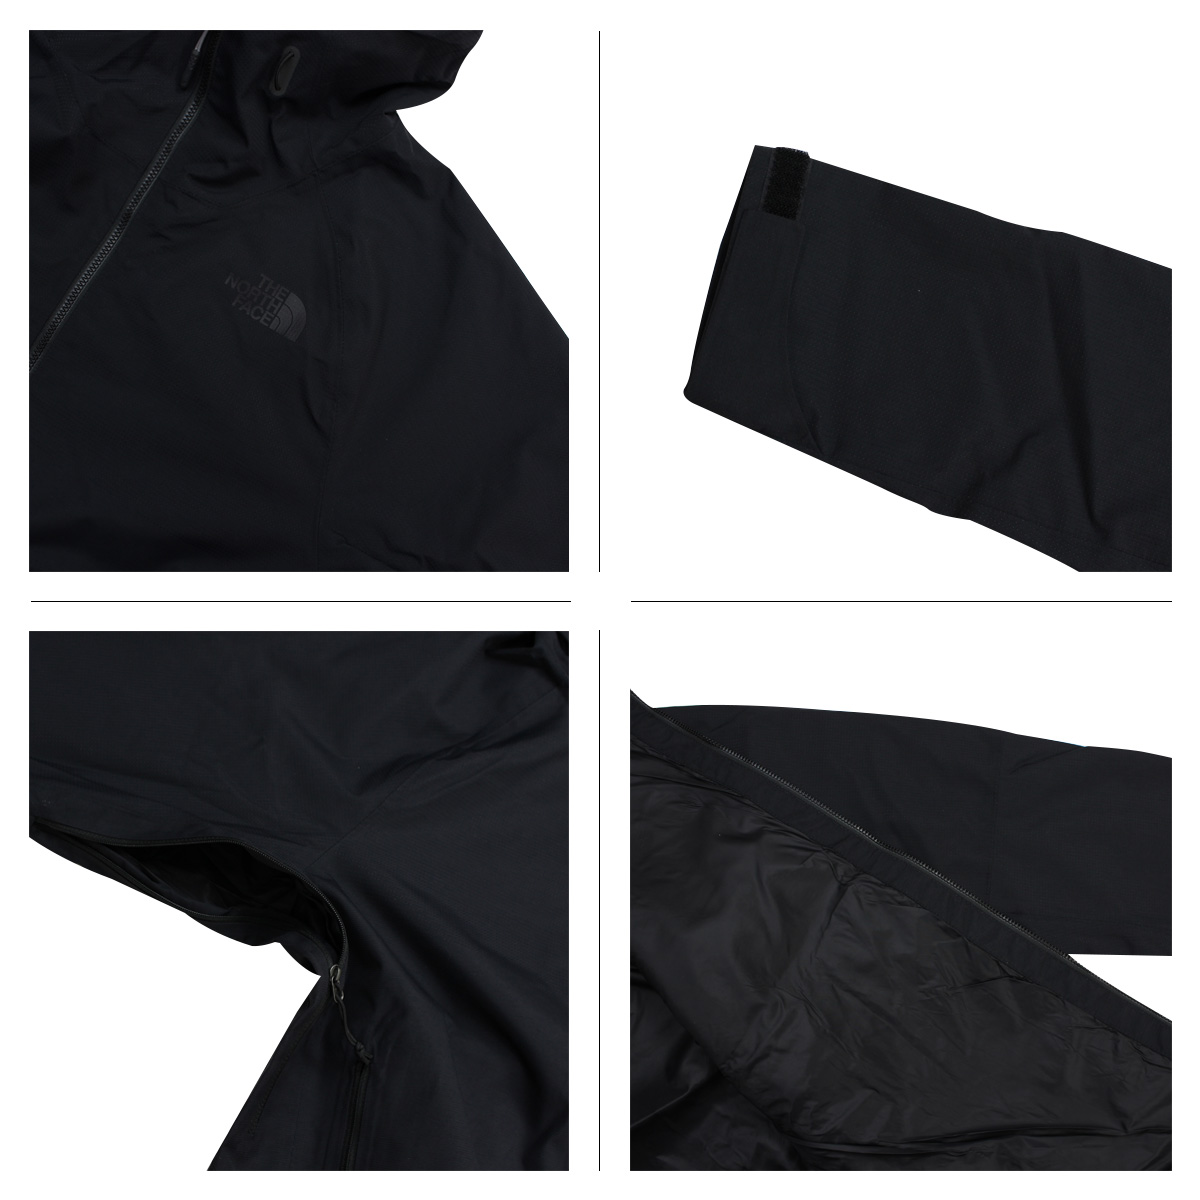 the north face fuseform montro insulated jacket